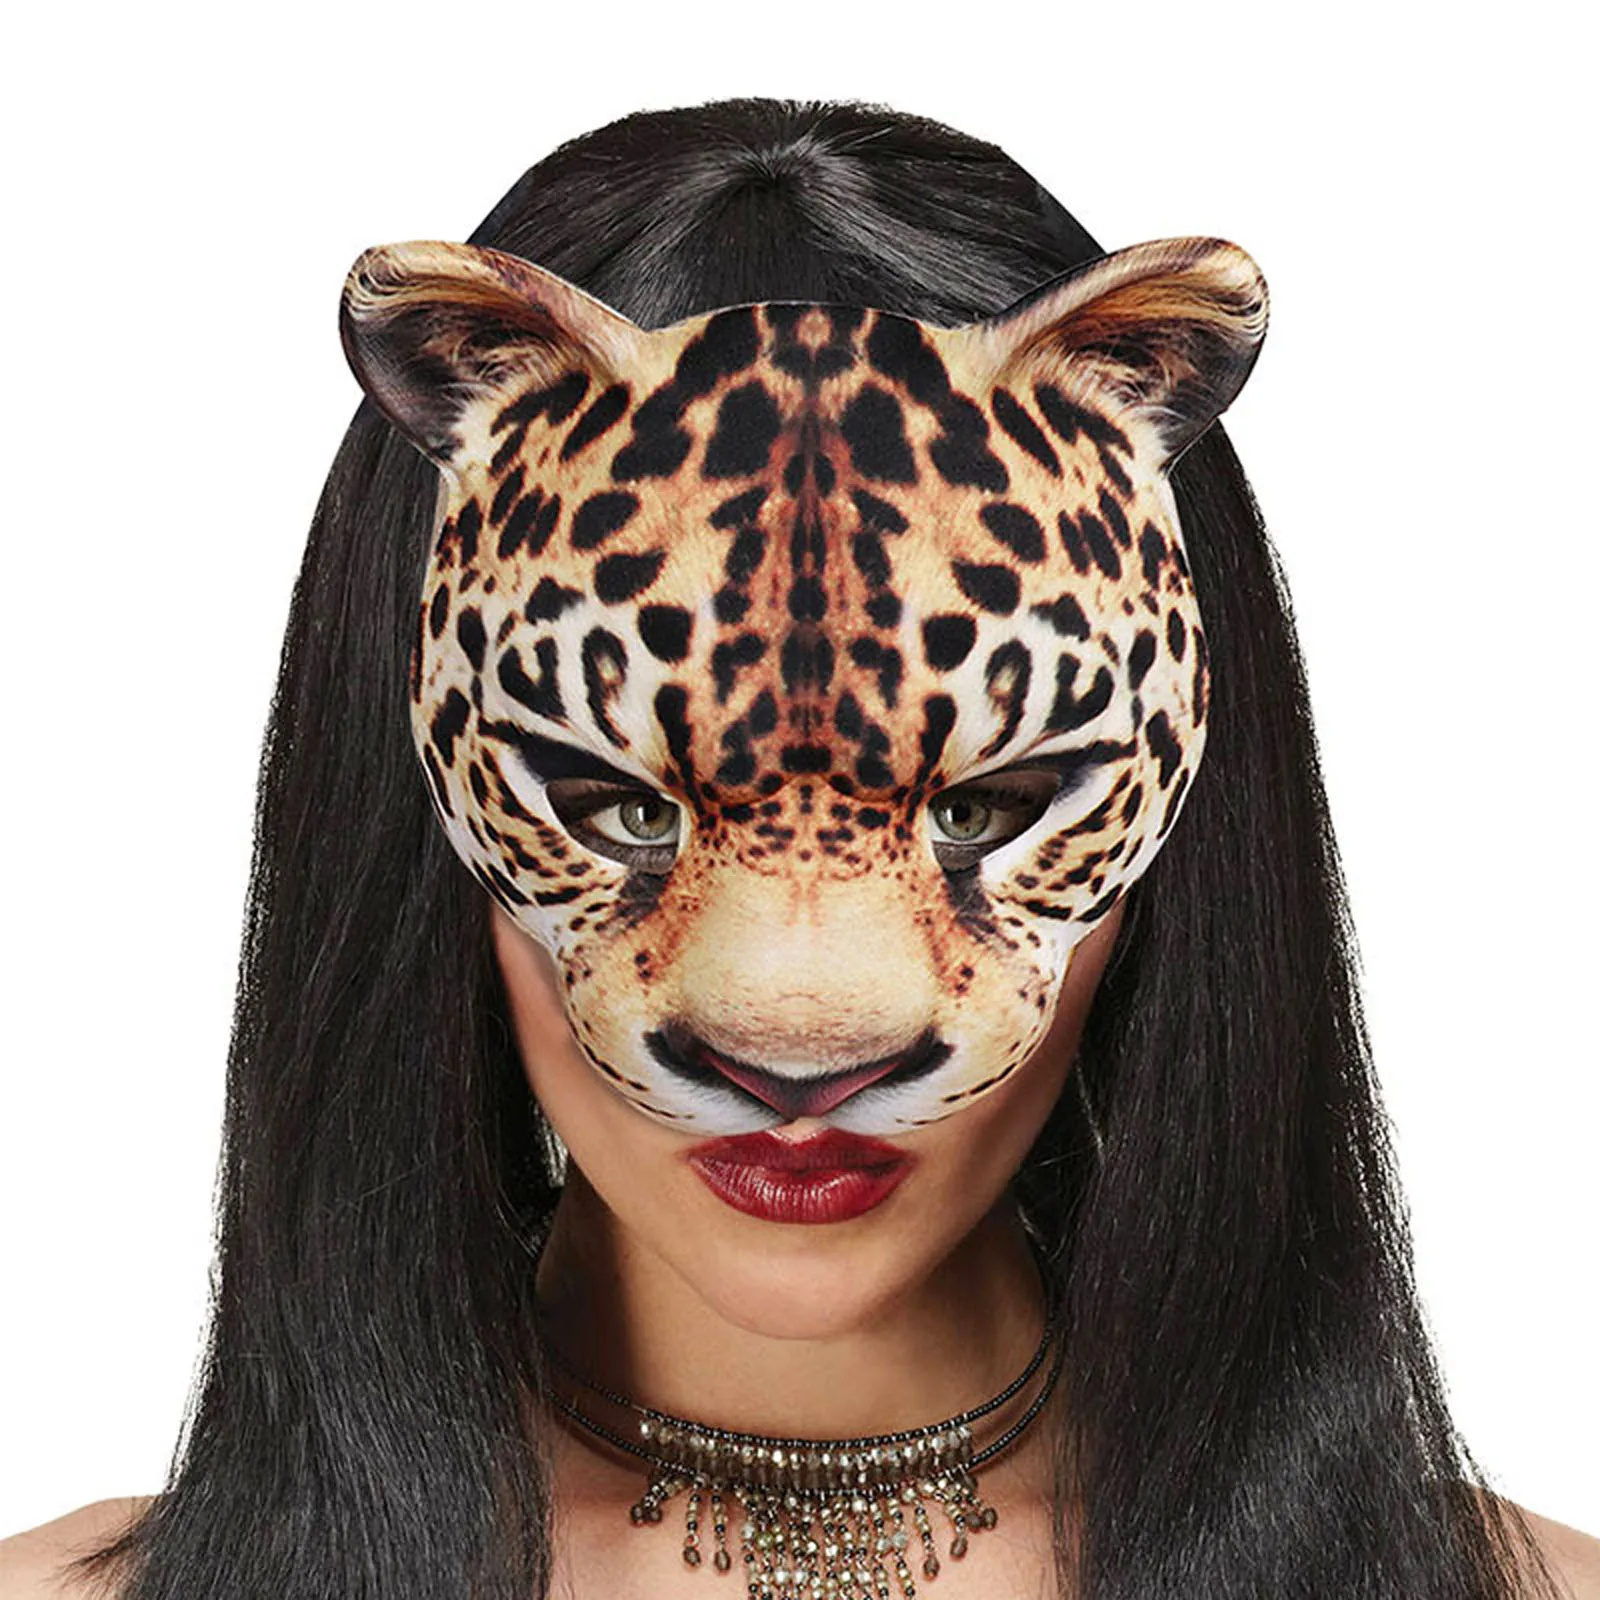 Tiger Lion Masquerade Ball Leopard Mask Halloween haunt house Costume Party 